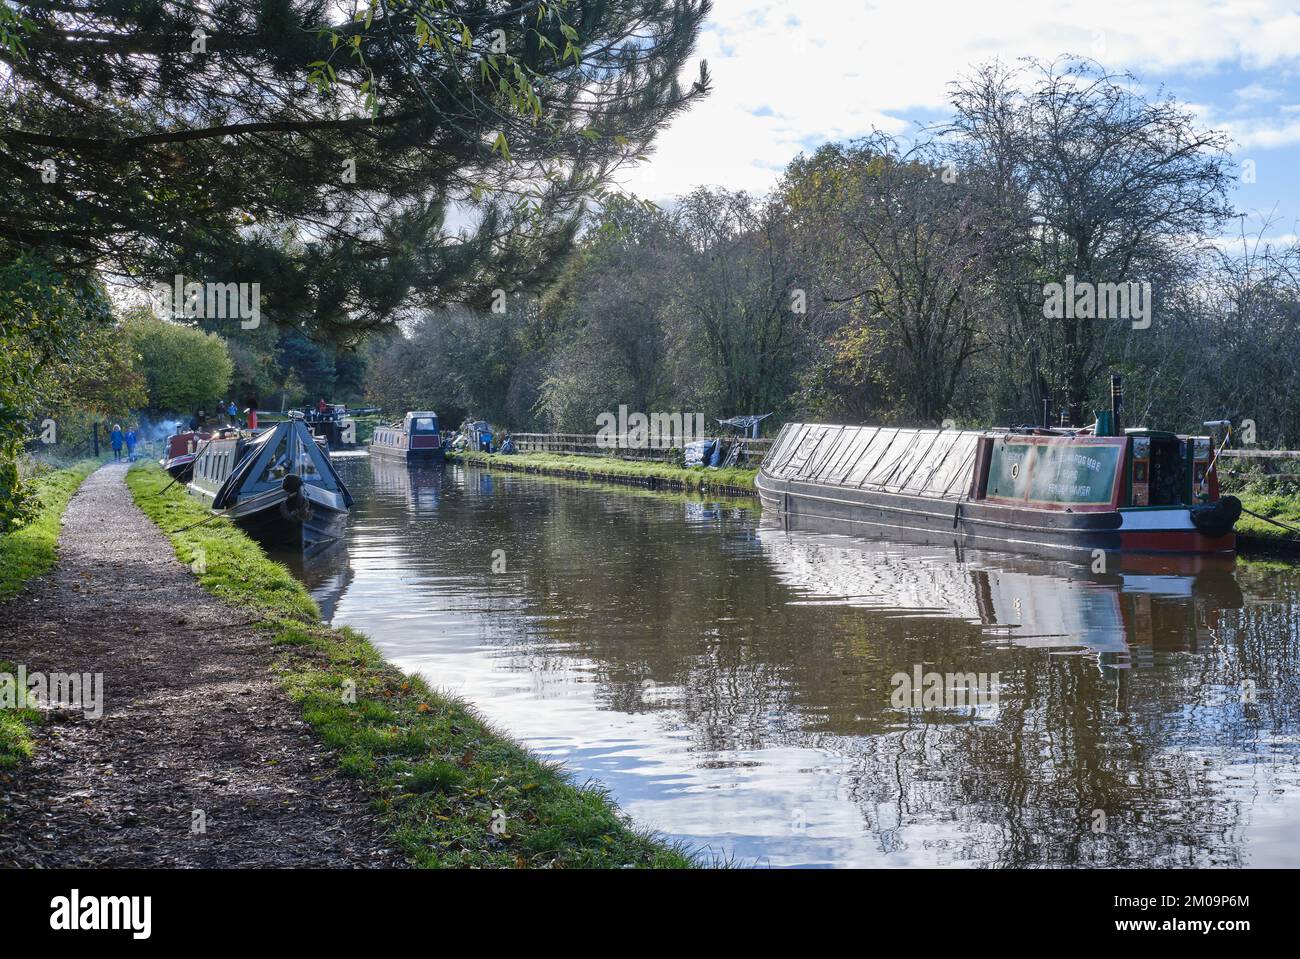 Narrow boats moored on the Shropshire Union Canal at Audlem, Cheshire Stock Photo